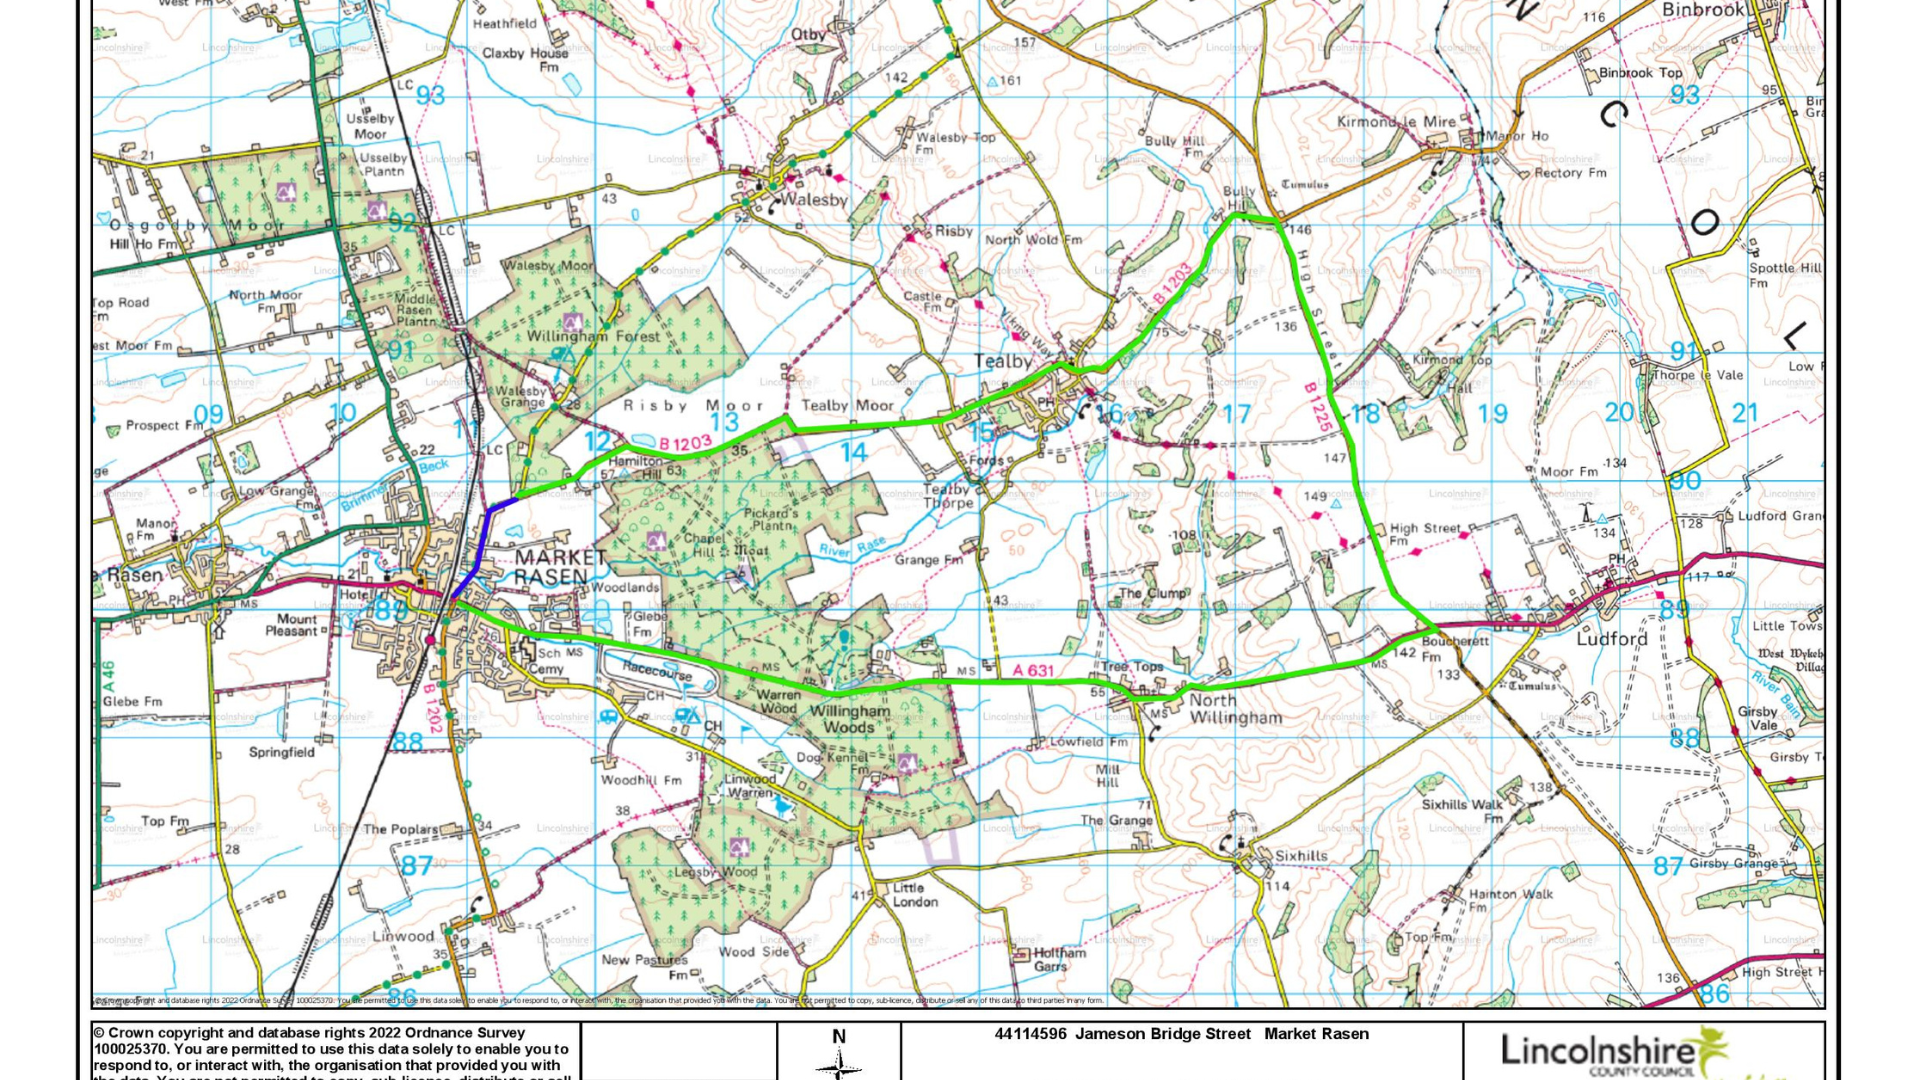 A road map of Market Rasen, Lincolnshire area